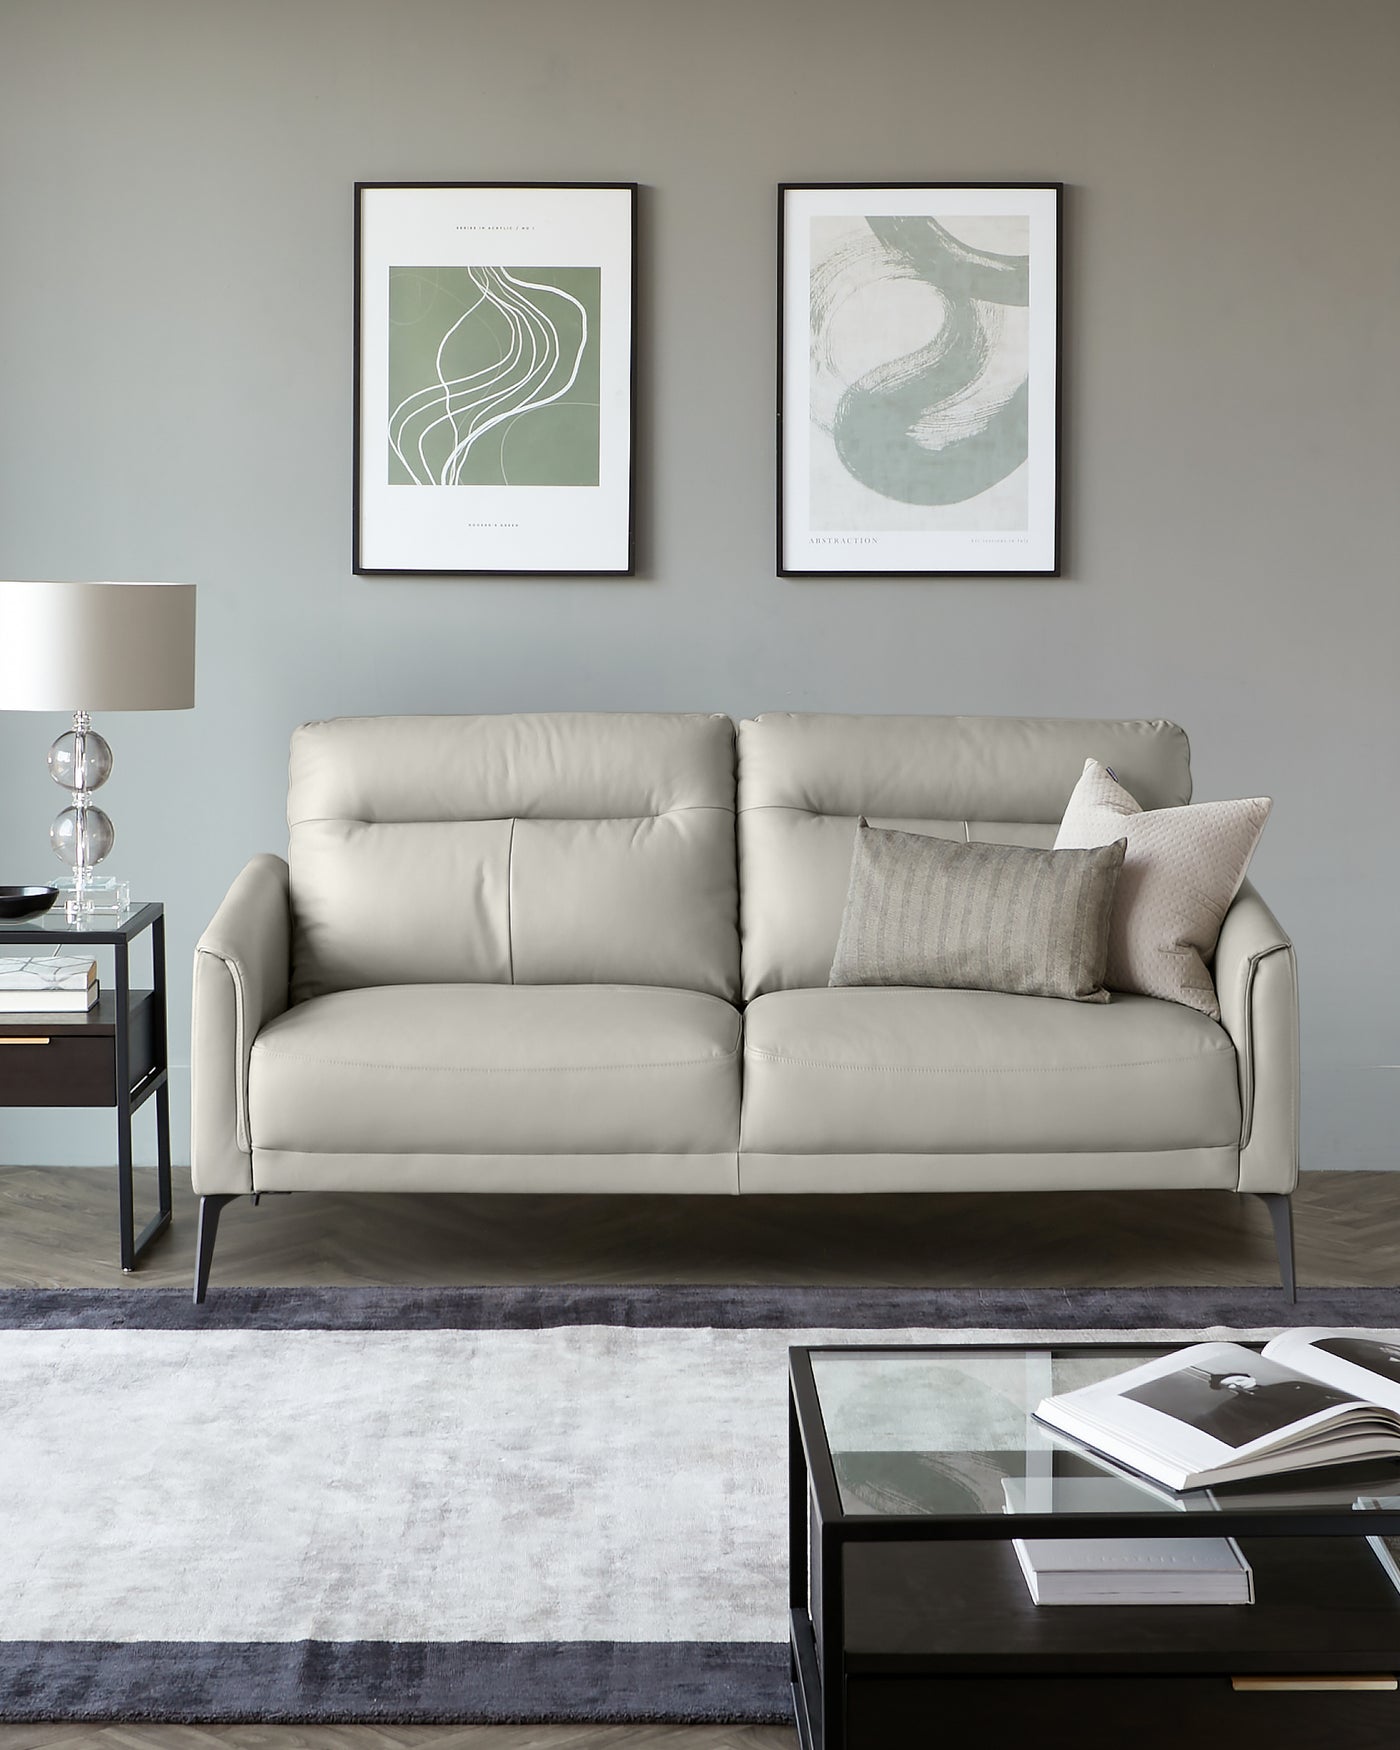 Contemporary light grey leather sofa with clean lines and metal legs, accompanied by a square black glass-top coffee table, standing on a grey and white area rug. A stylish table lamp with a translucent base is placed on a dark wood side table next to the sofa, and decorative grey-toned pillows accentuate the sofa's neutral palette.